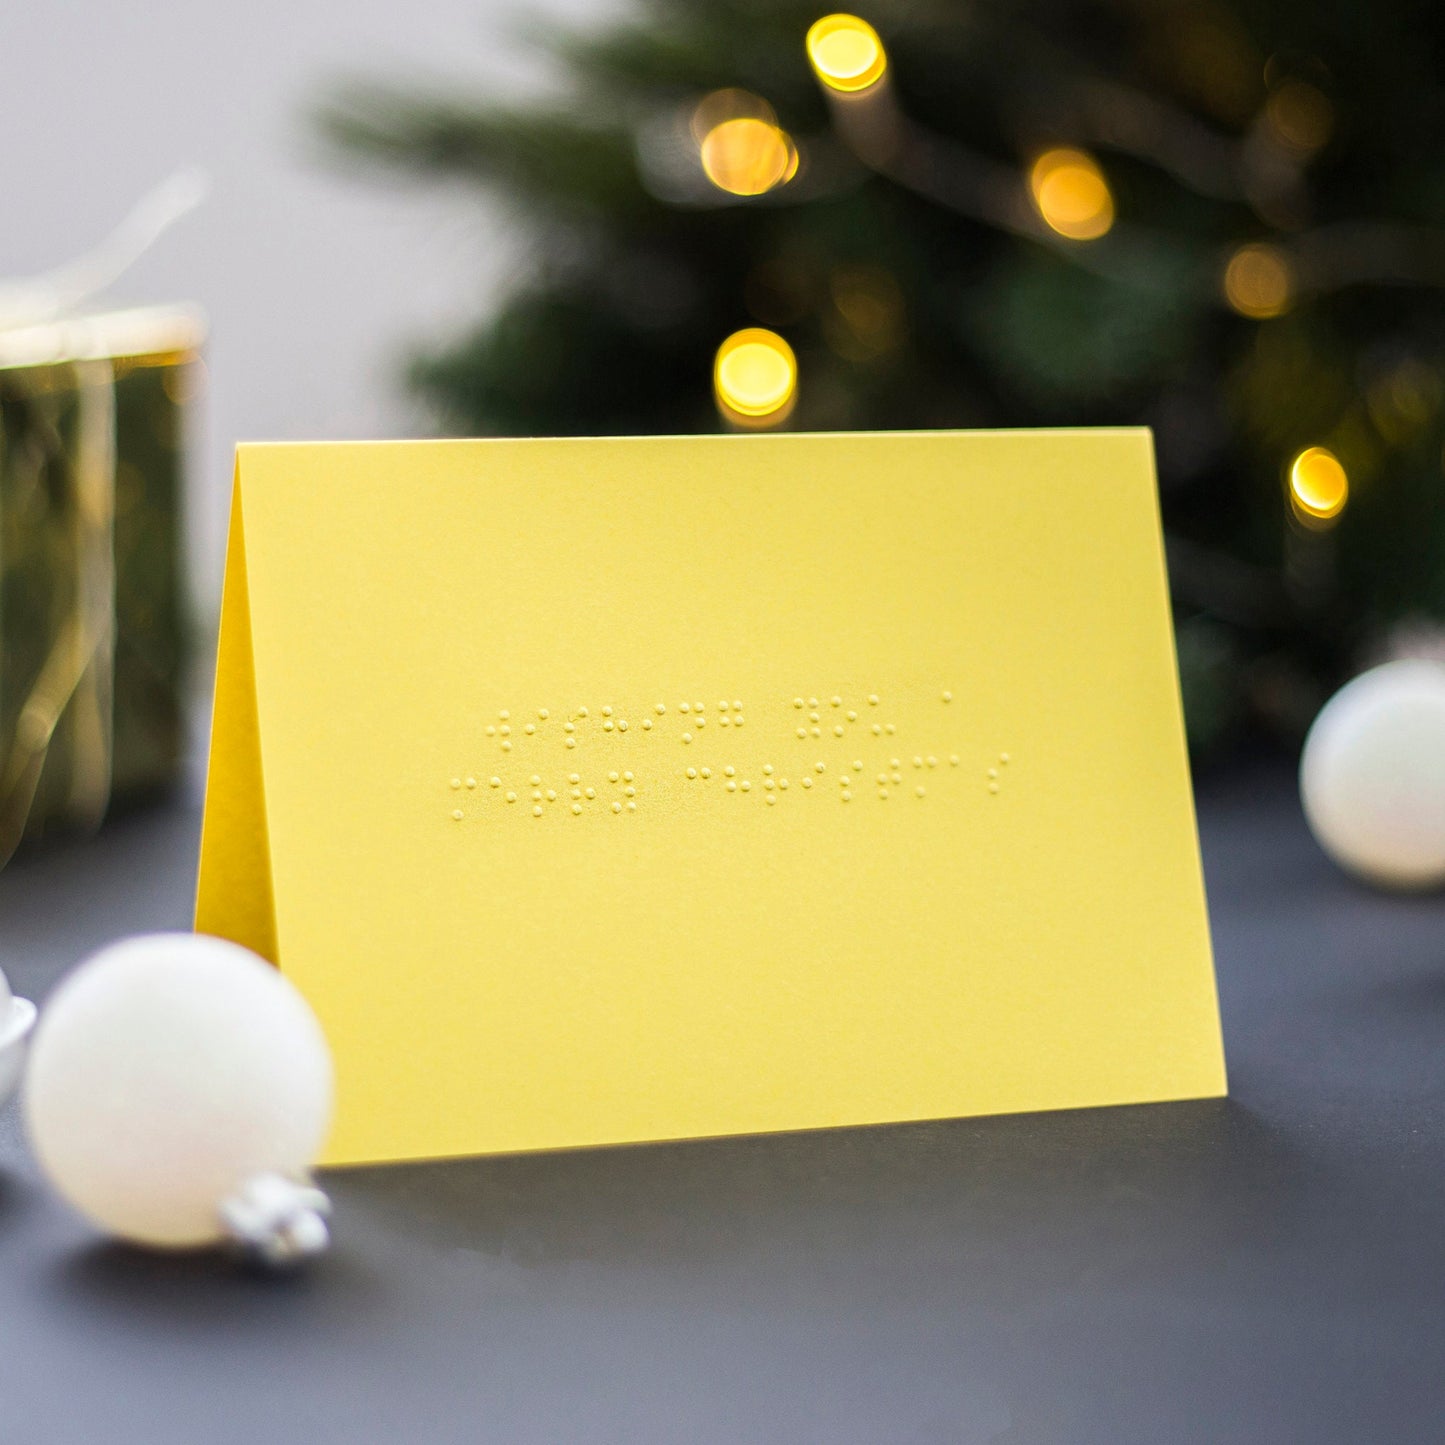 A yellow braille Christmas card saying Wishing You A Merry Christmas written in lower case UEB.